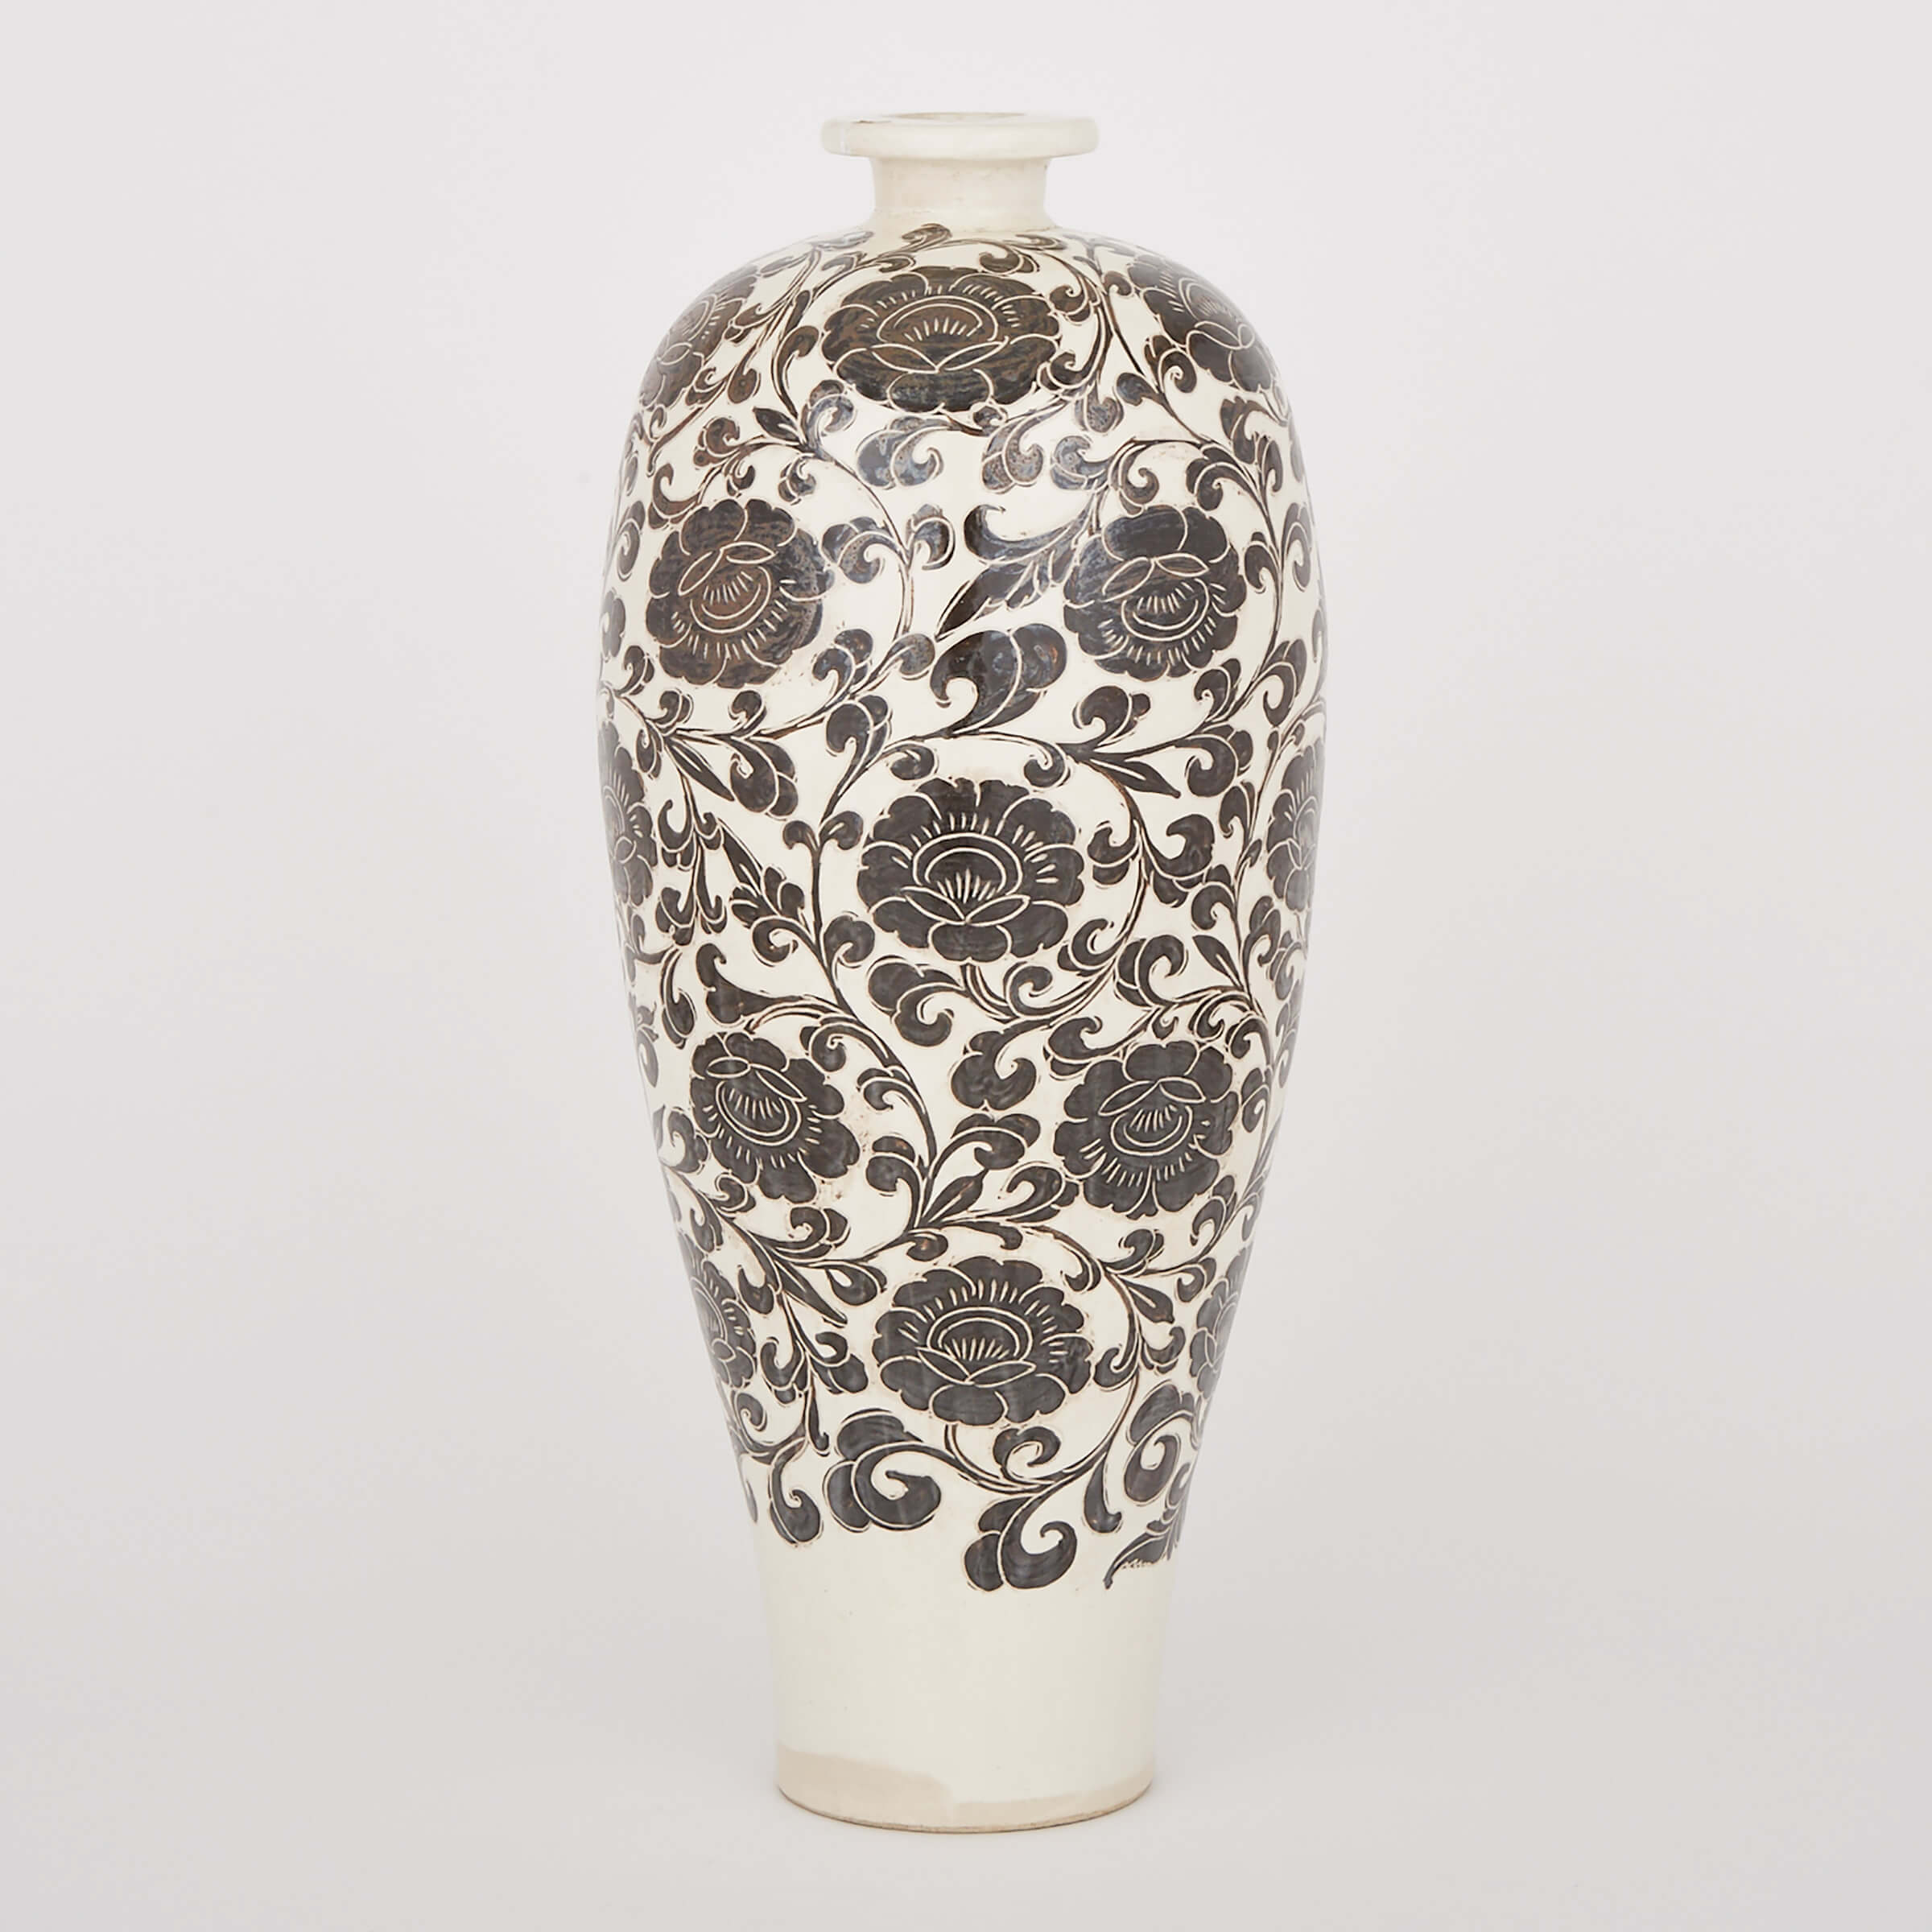 A Cizhou Meiping Vase, 19th Century